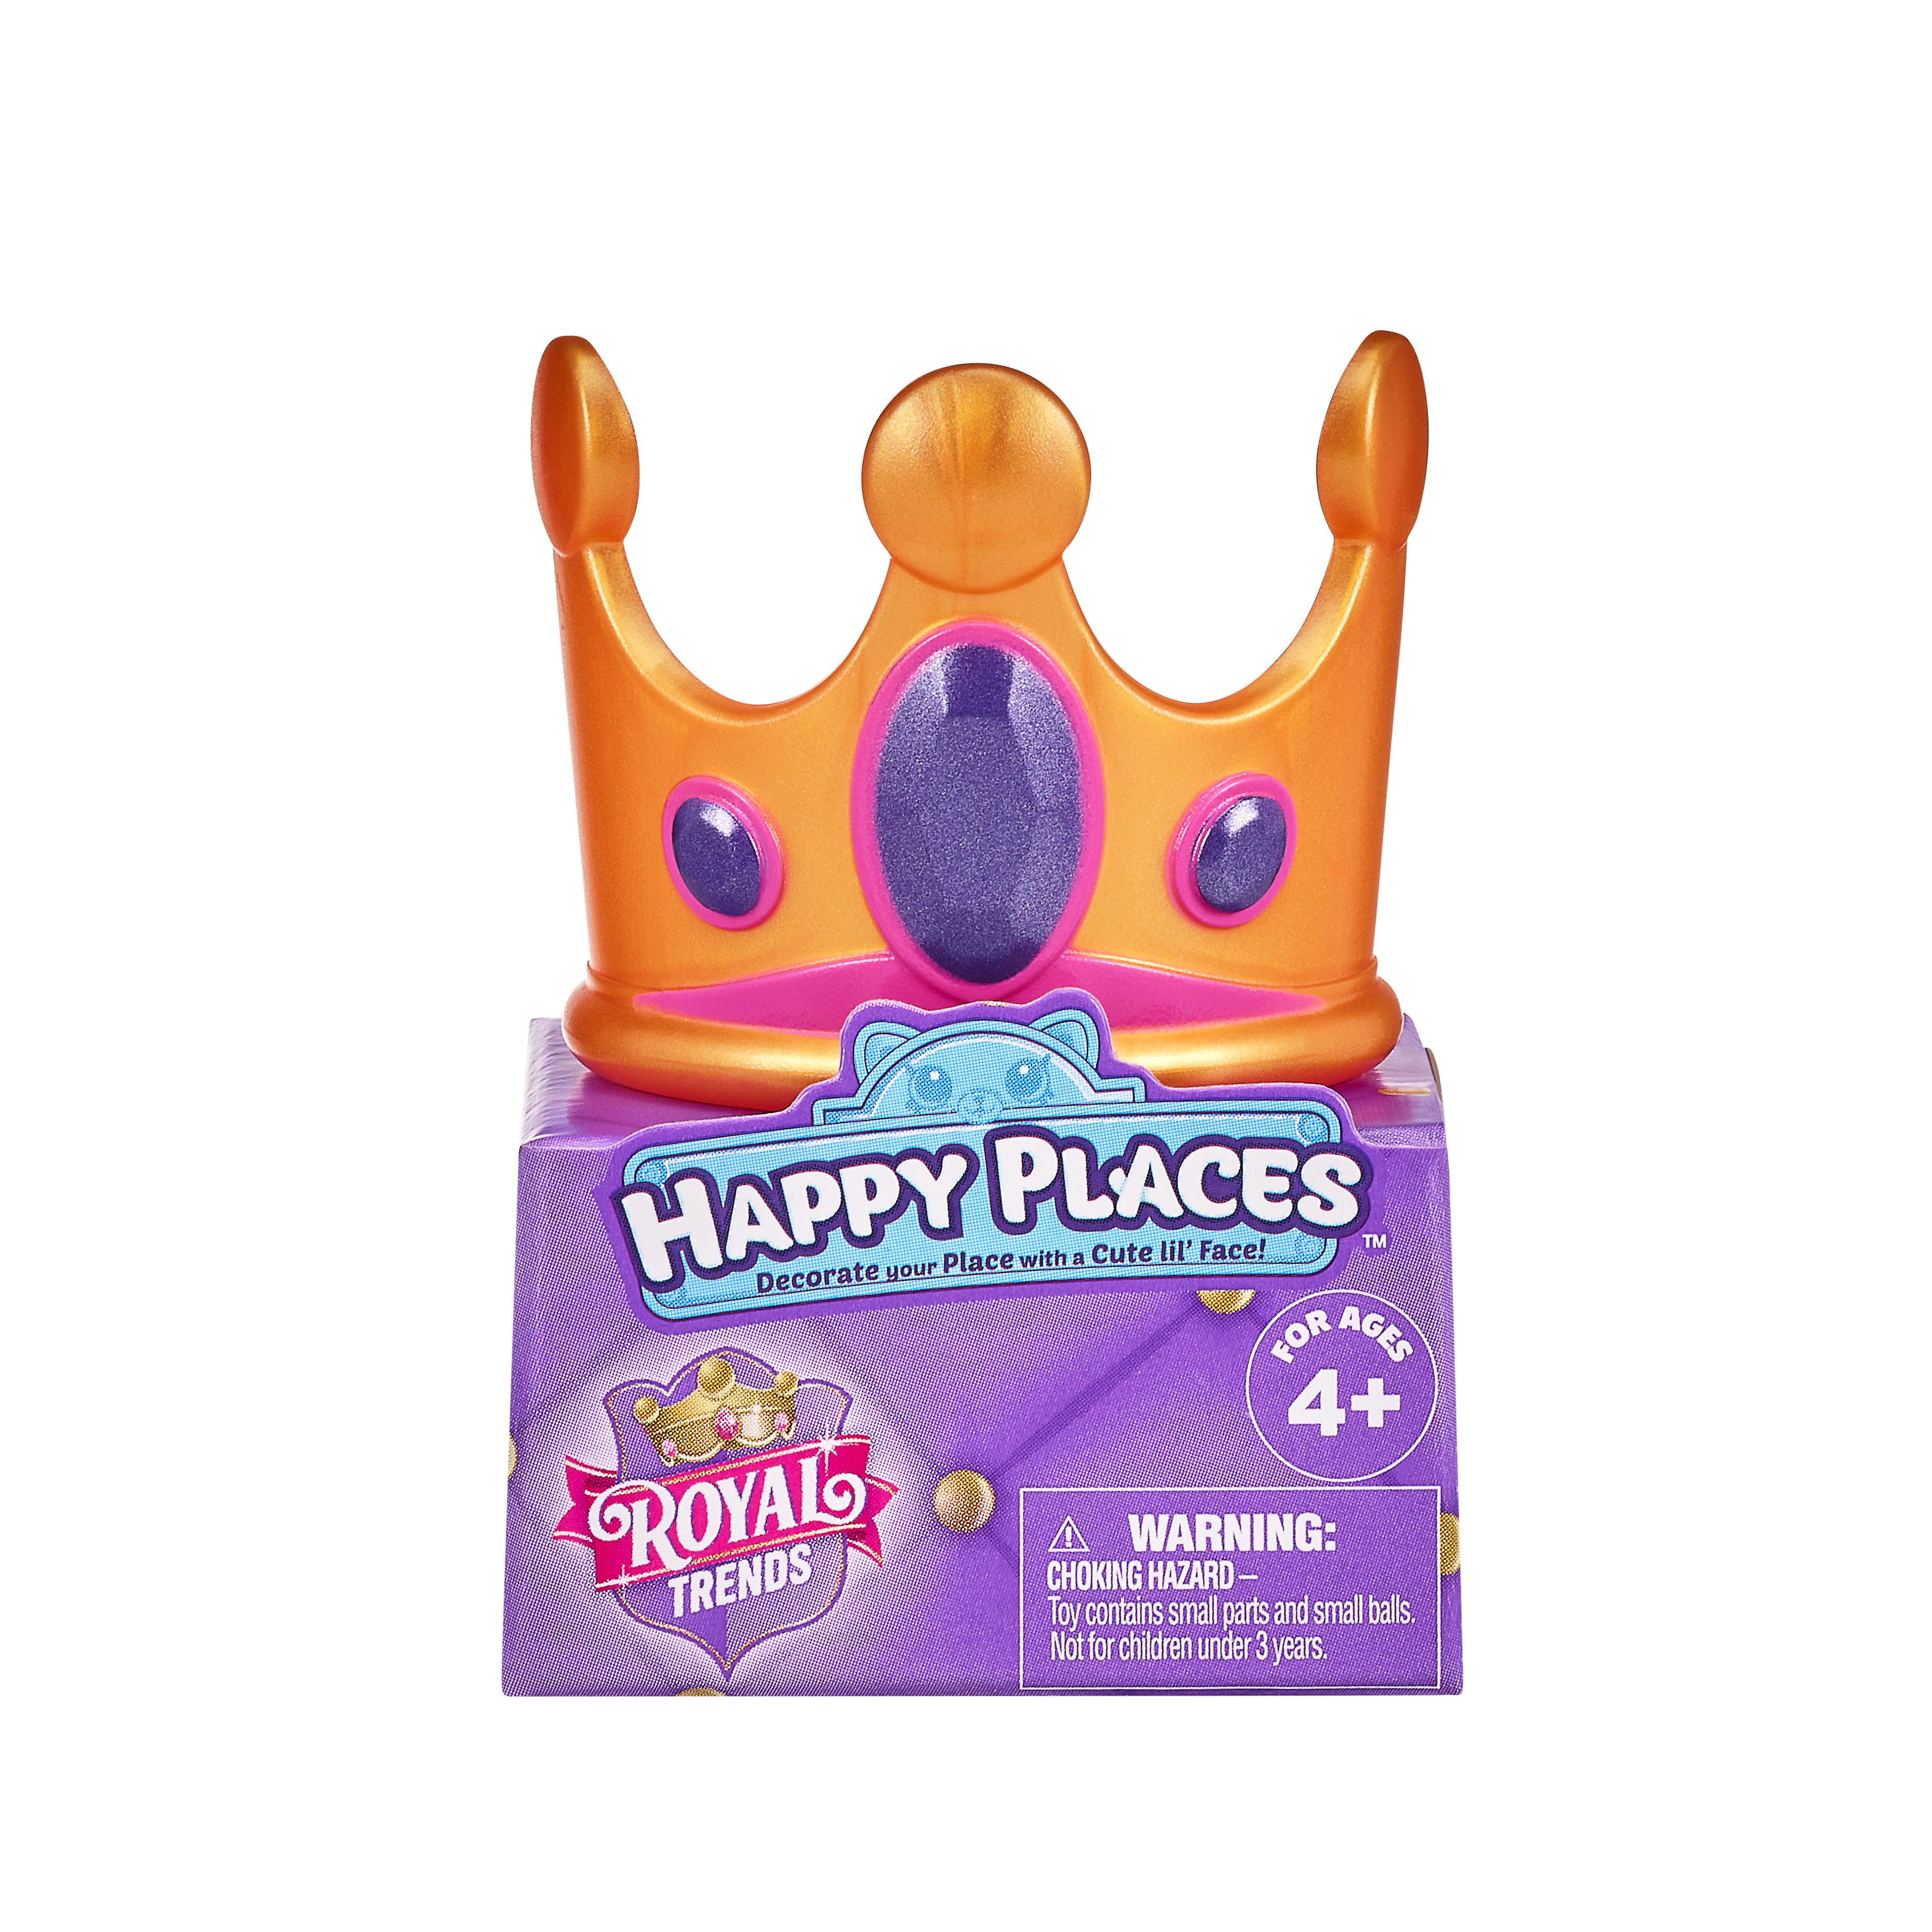 NS Shopkins Happy Places Doll House Line, Party Favors & Stocking Stuffer  on Birthdays Halloween Christmas for Girls Ages 4 and up Collectible Pets